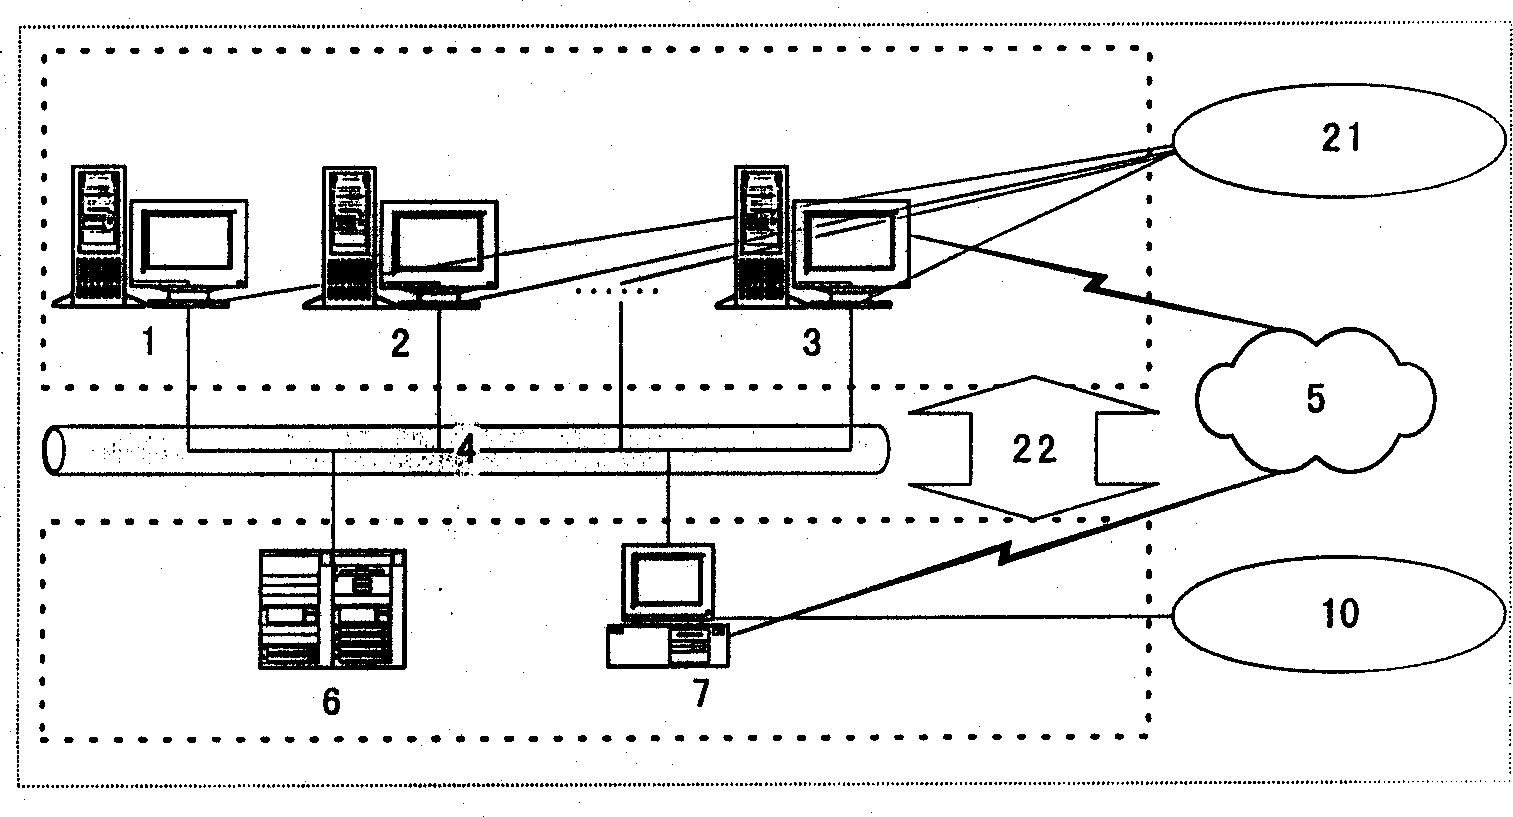 Safe web page issuing system based on base layer of operation system and capable of preventing distortion of issued file